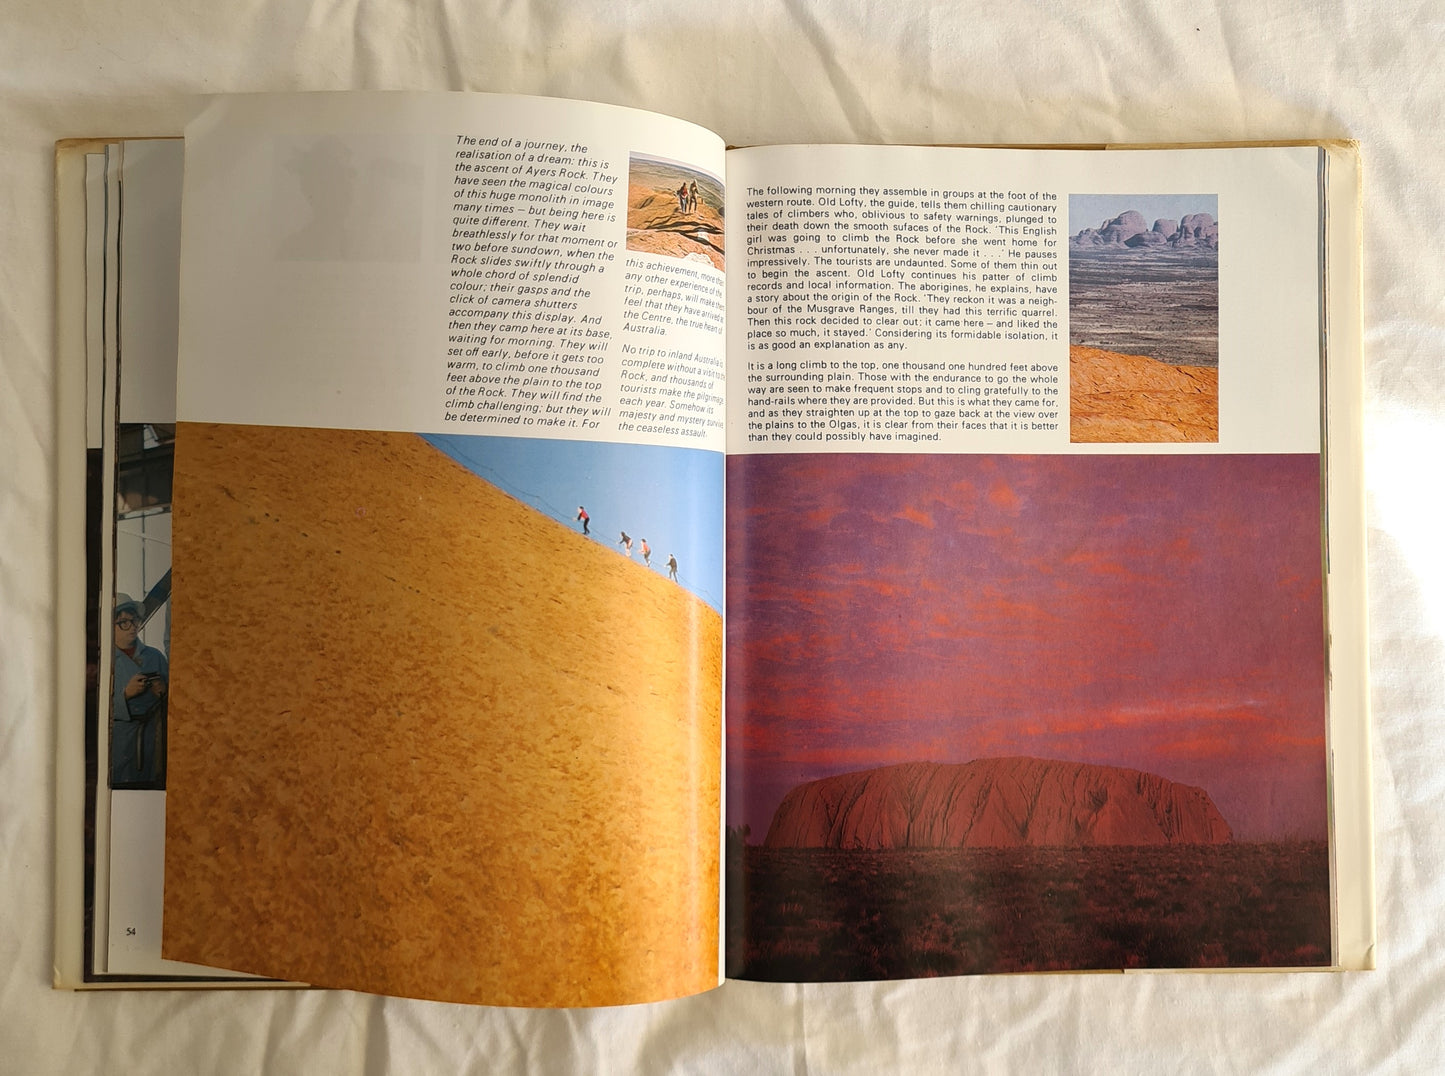 A Big Country by Ron Iddon and John Mabey